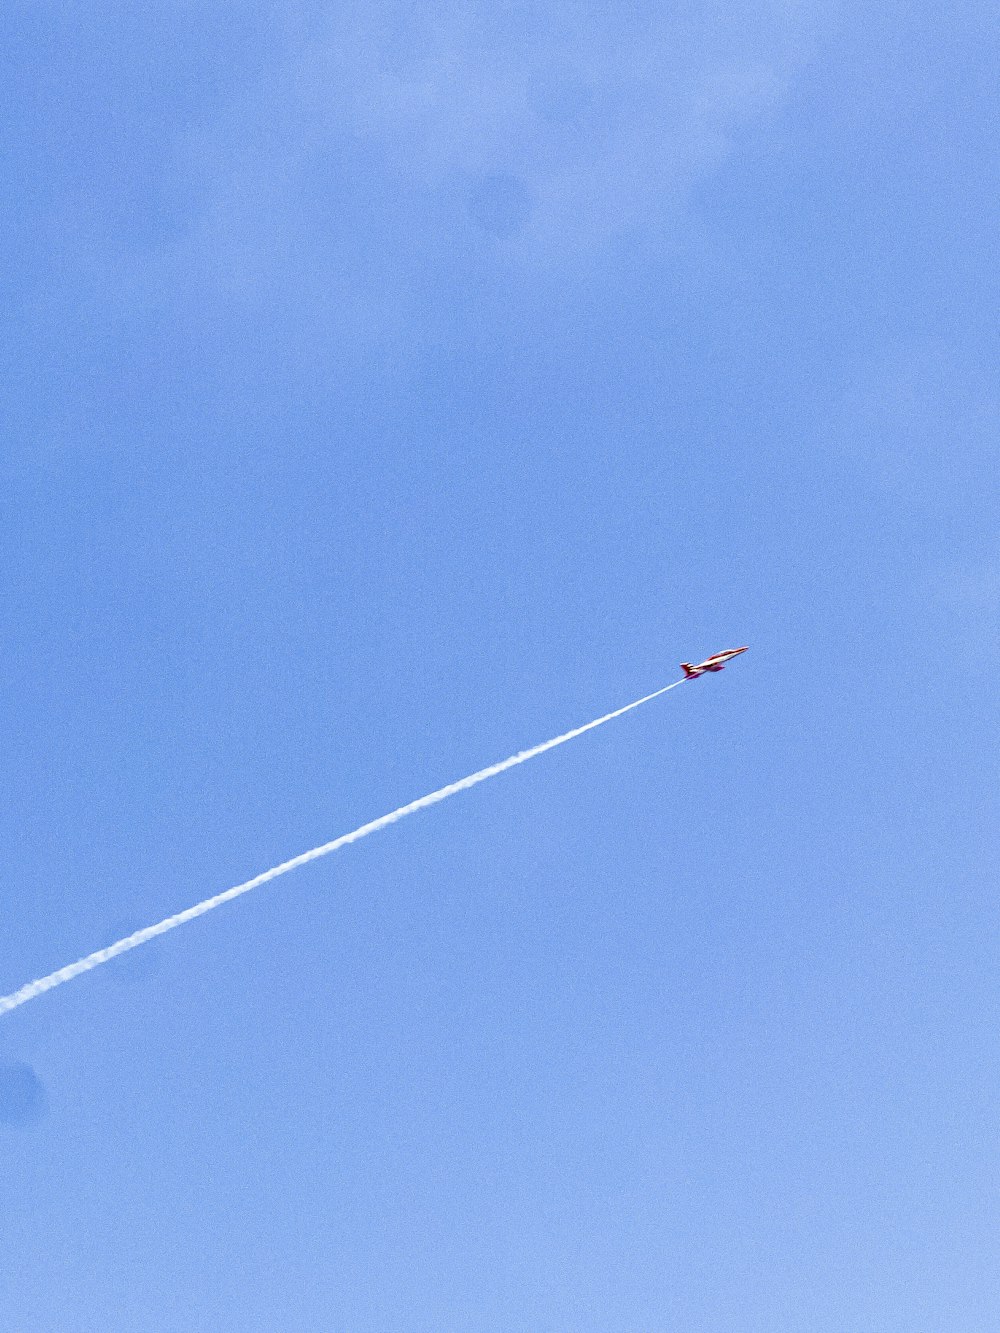 a plane flying in the sky with a contrail behind it